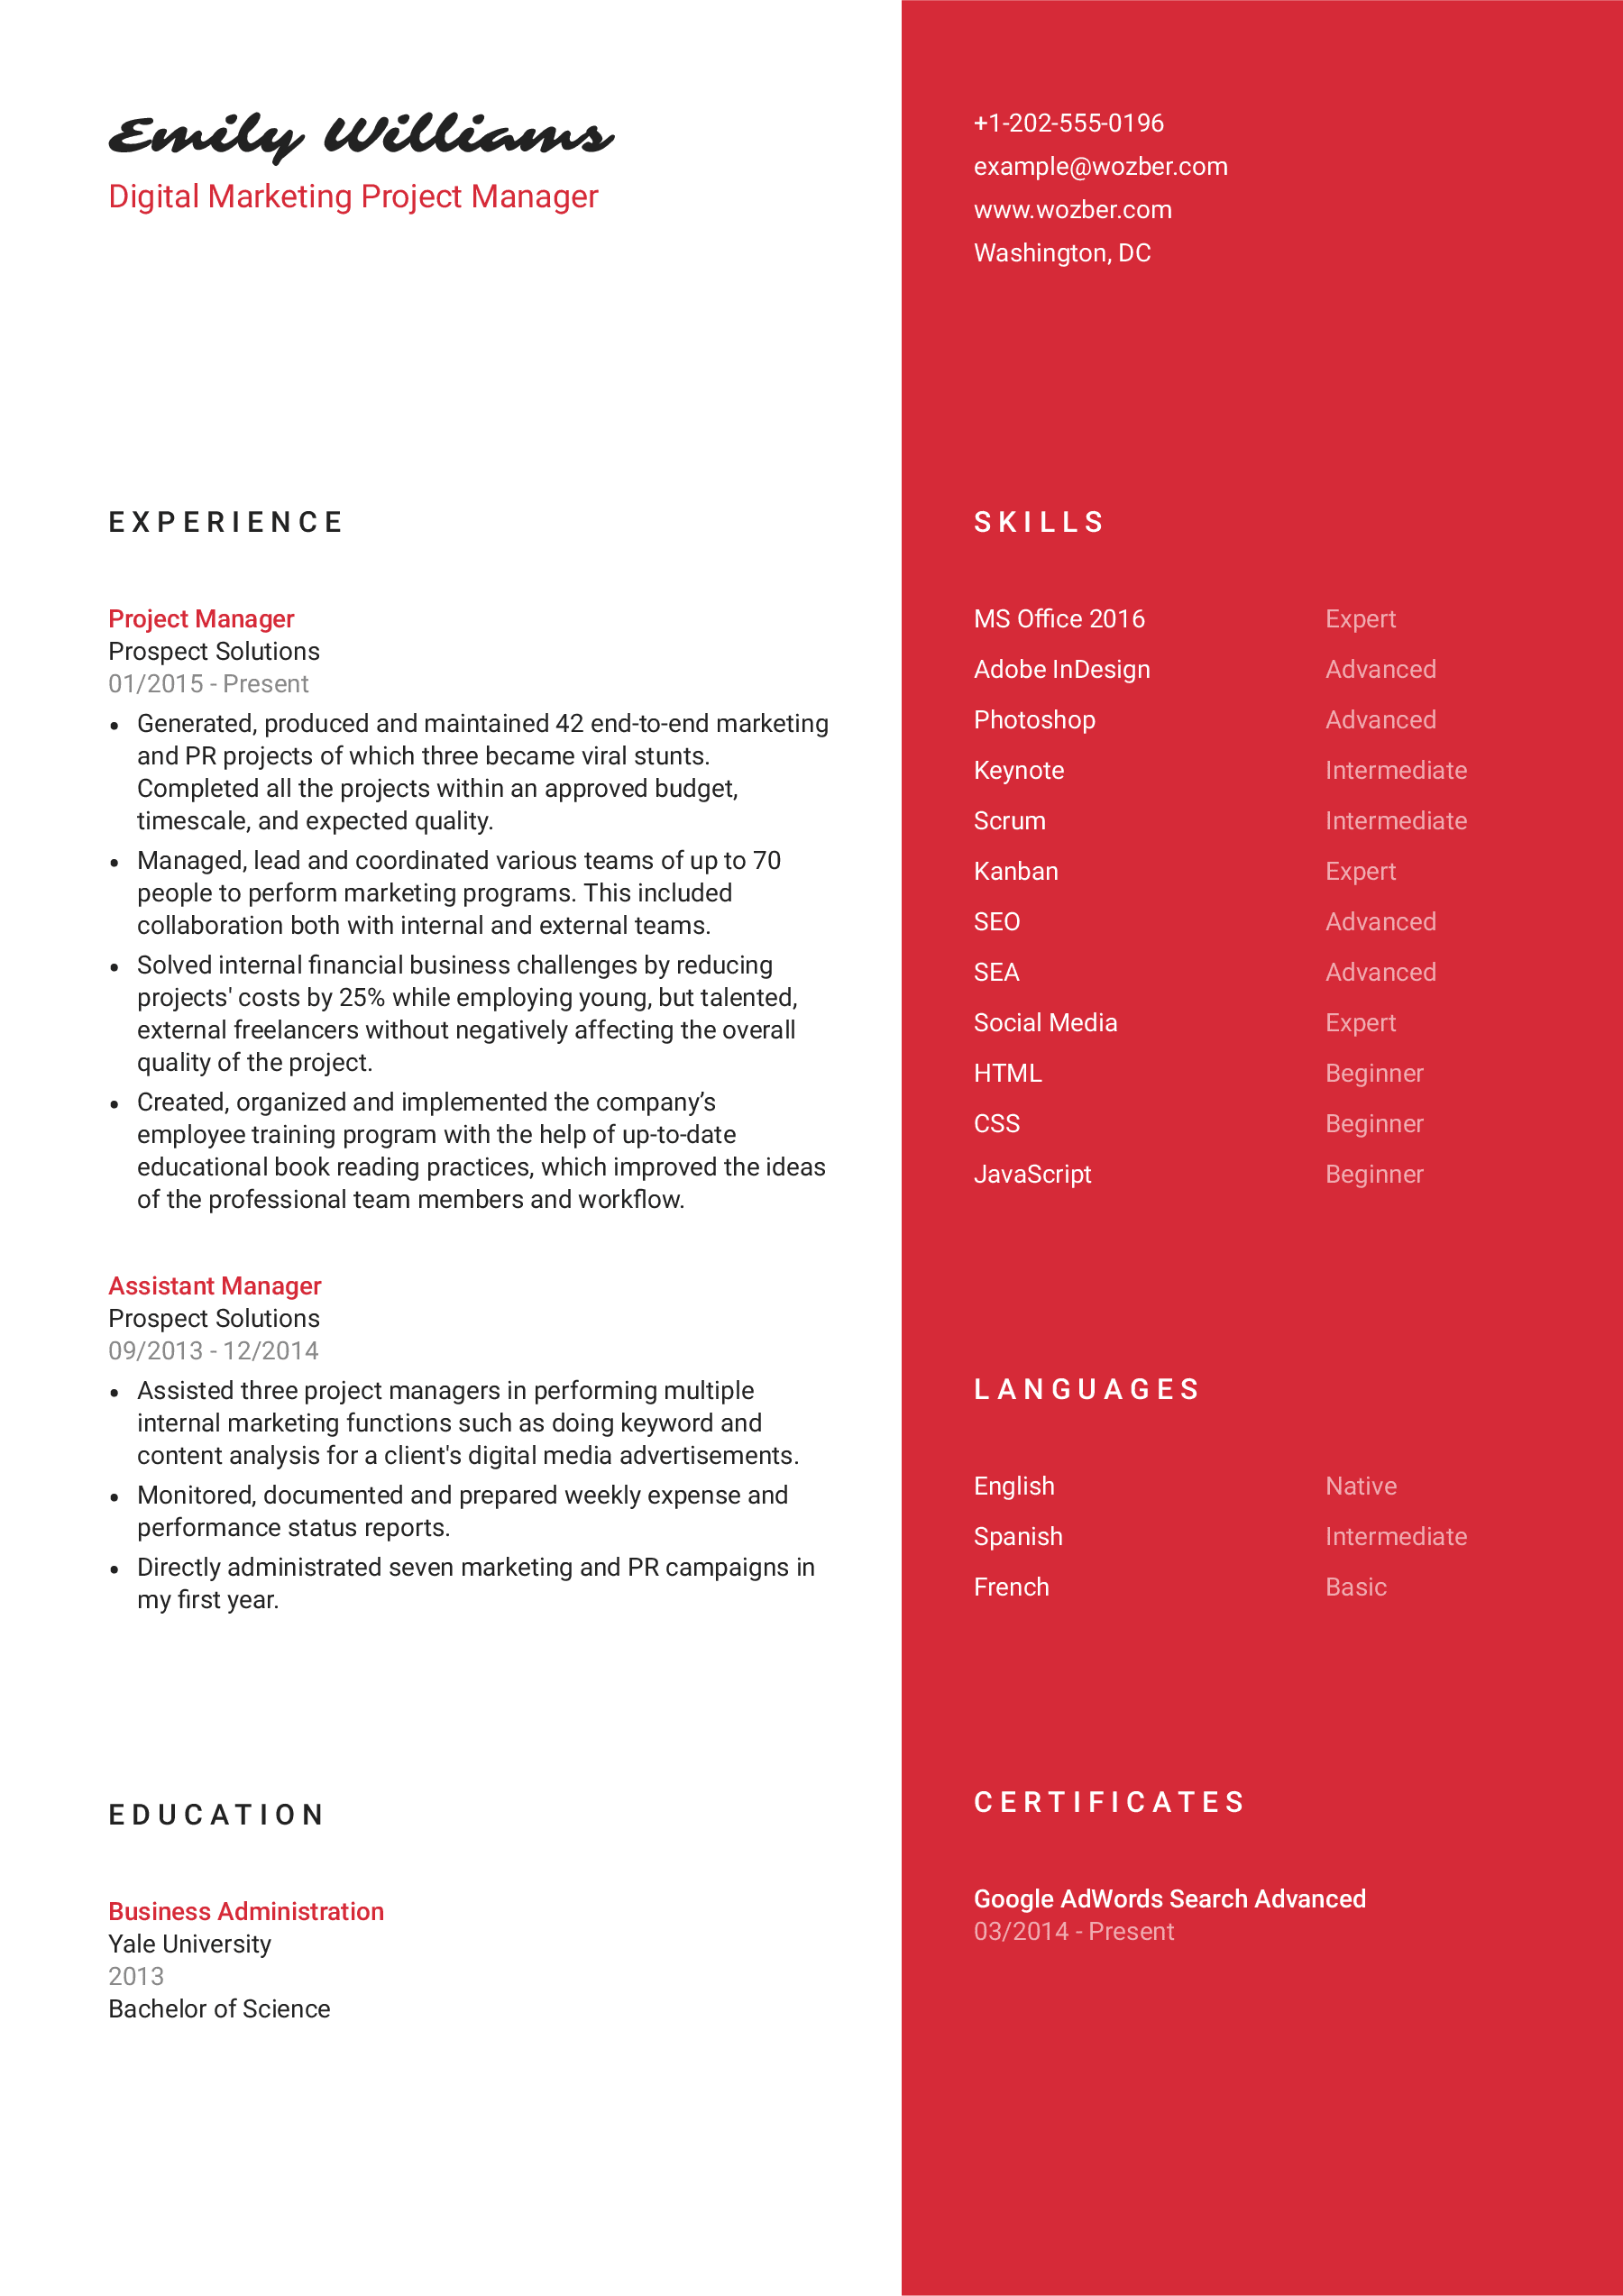 An elegant, single-colored, two-column resume template for those in the spotlight.